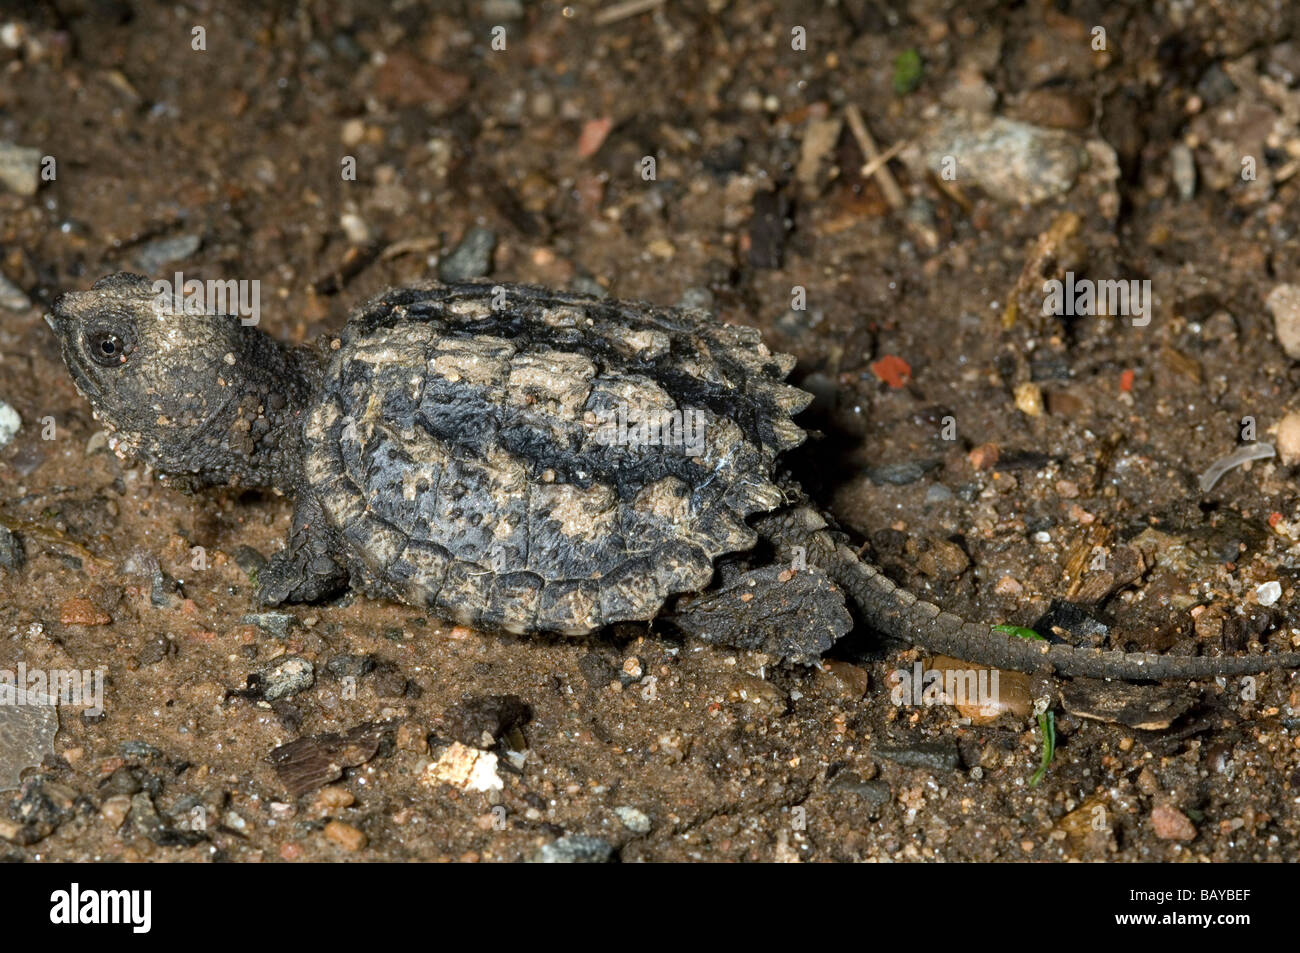 Baby common snapping turtle Chelydra serpentina in backyard. Stock Photo